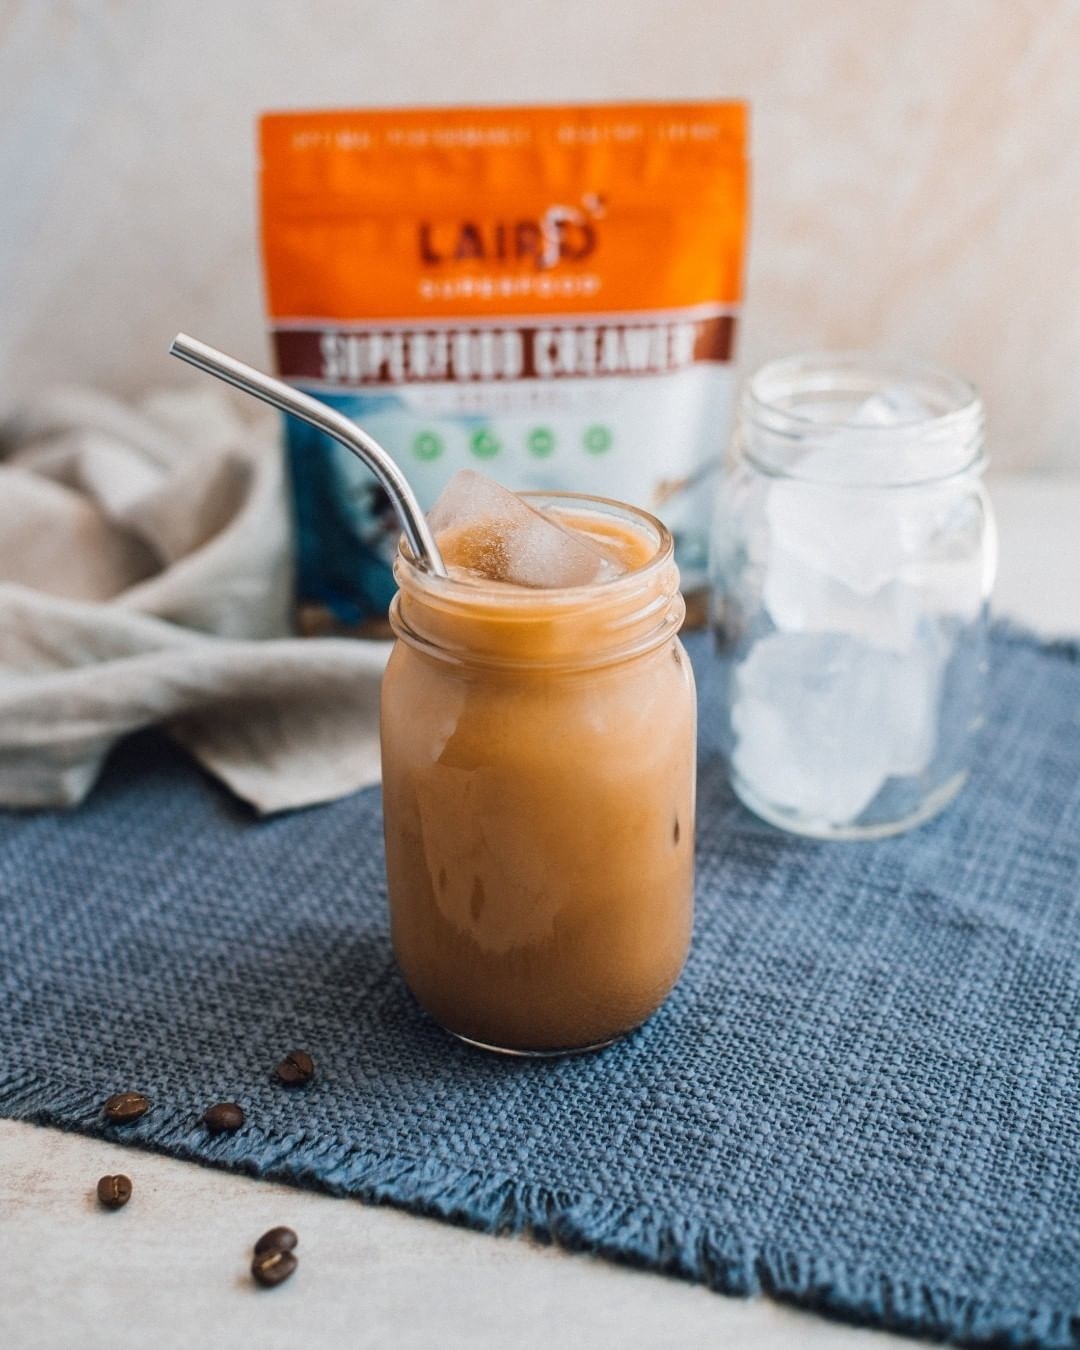 iced coffee in a mason jar with the package of laird superfood creamer behind it out of focus